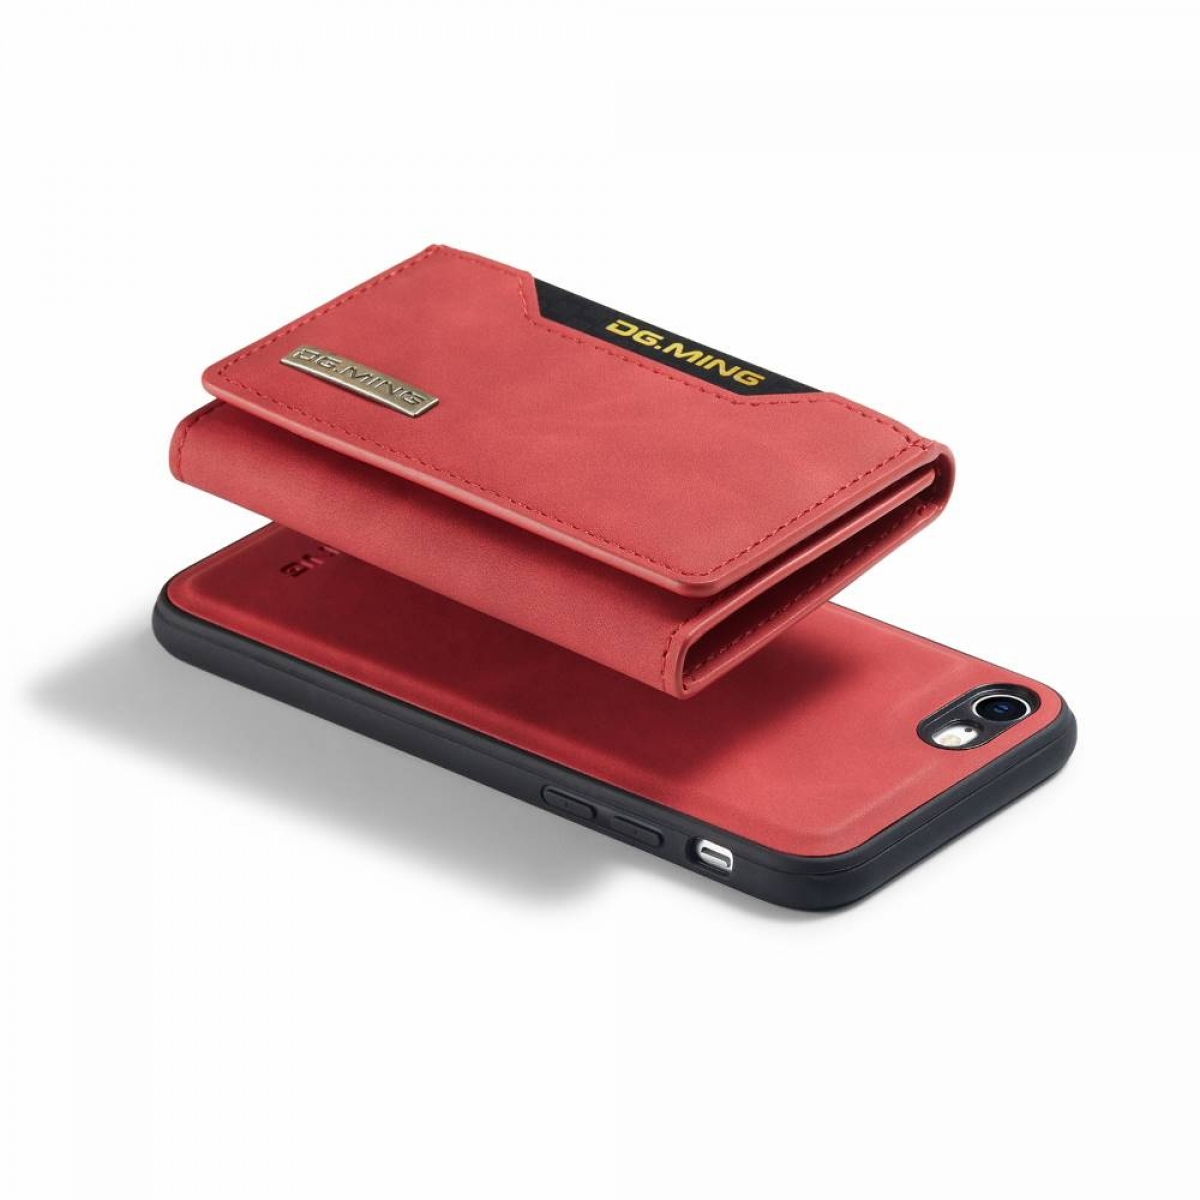 DG MING 8, iPhone M2 Rot Apple, Backcover, 2in1